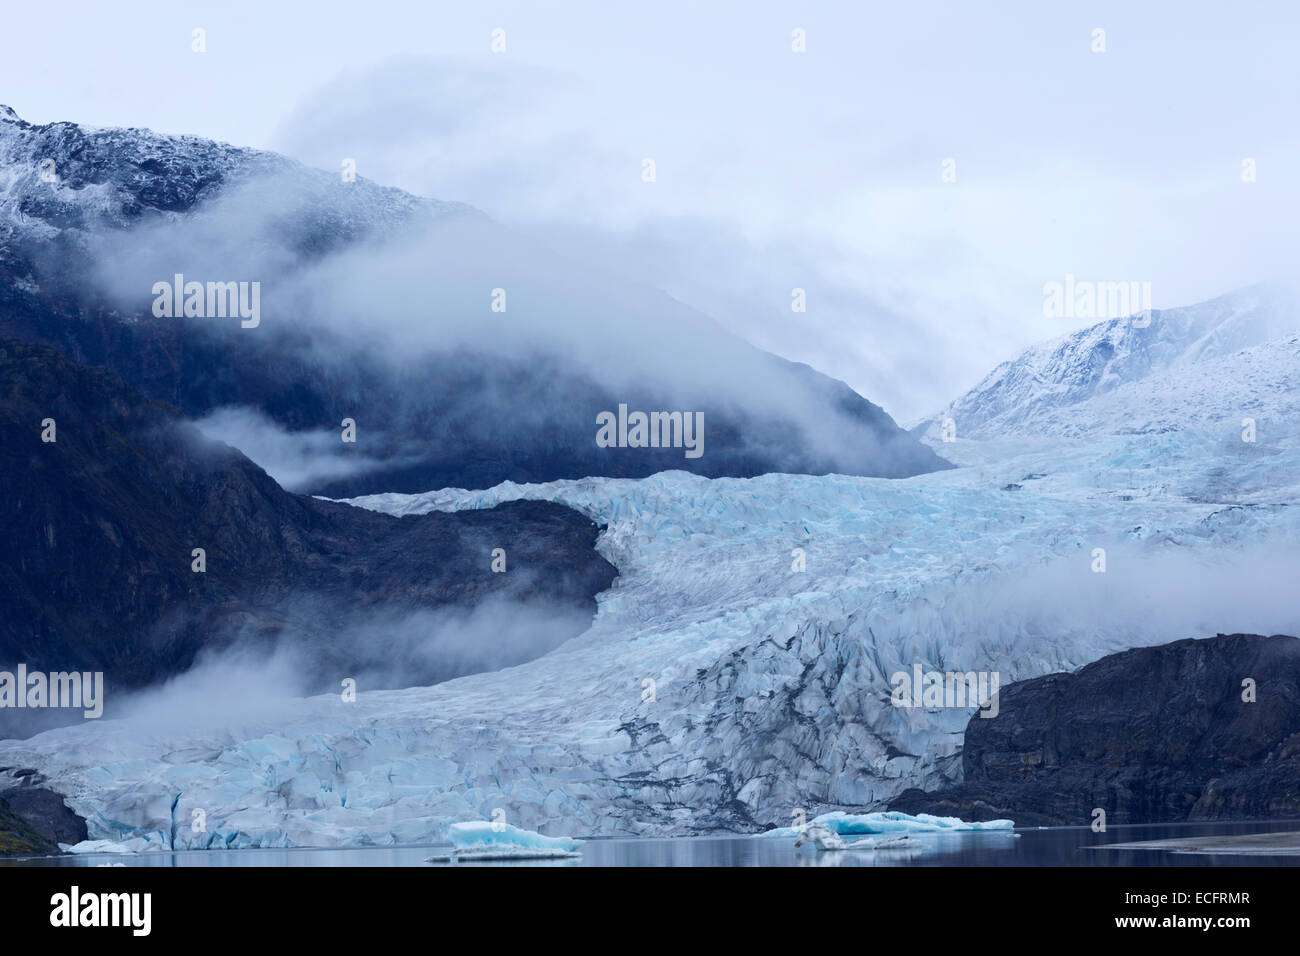 Misty hues of blue of the receding tongue of the Mendenhall Glacier and its ice melt lake in Juneau, Alaska. Stock Photo